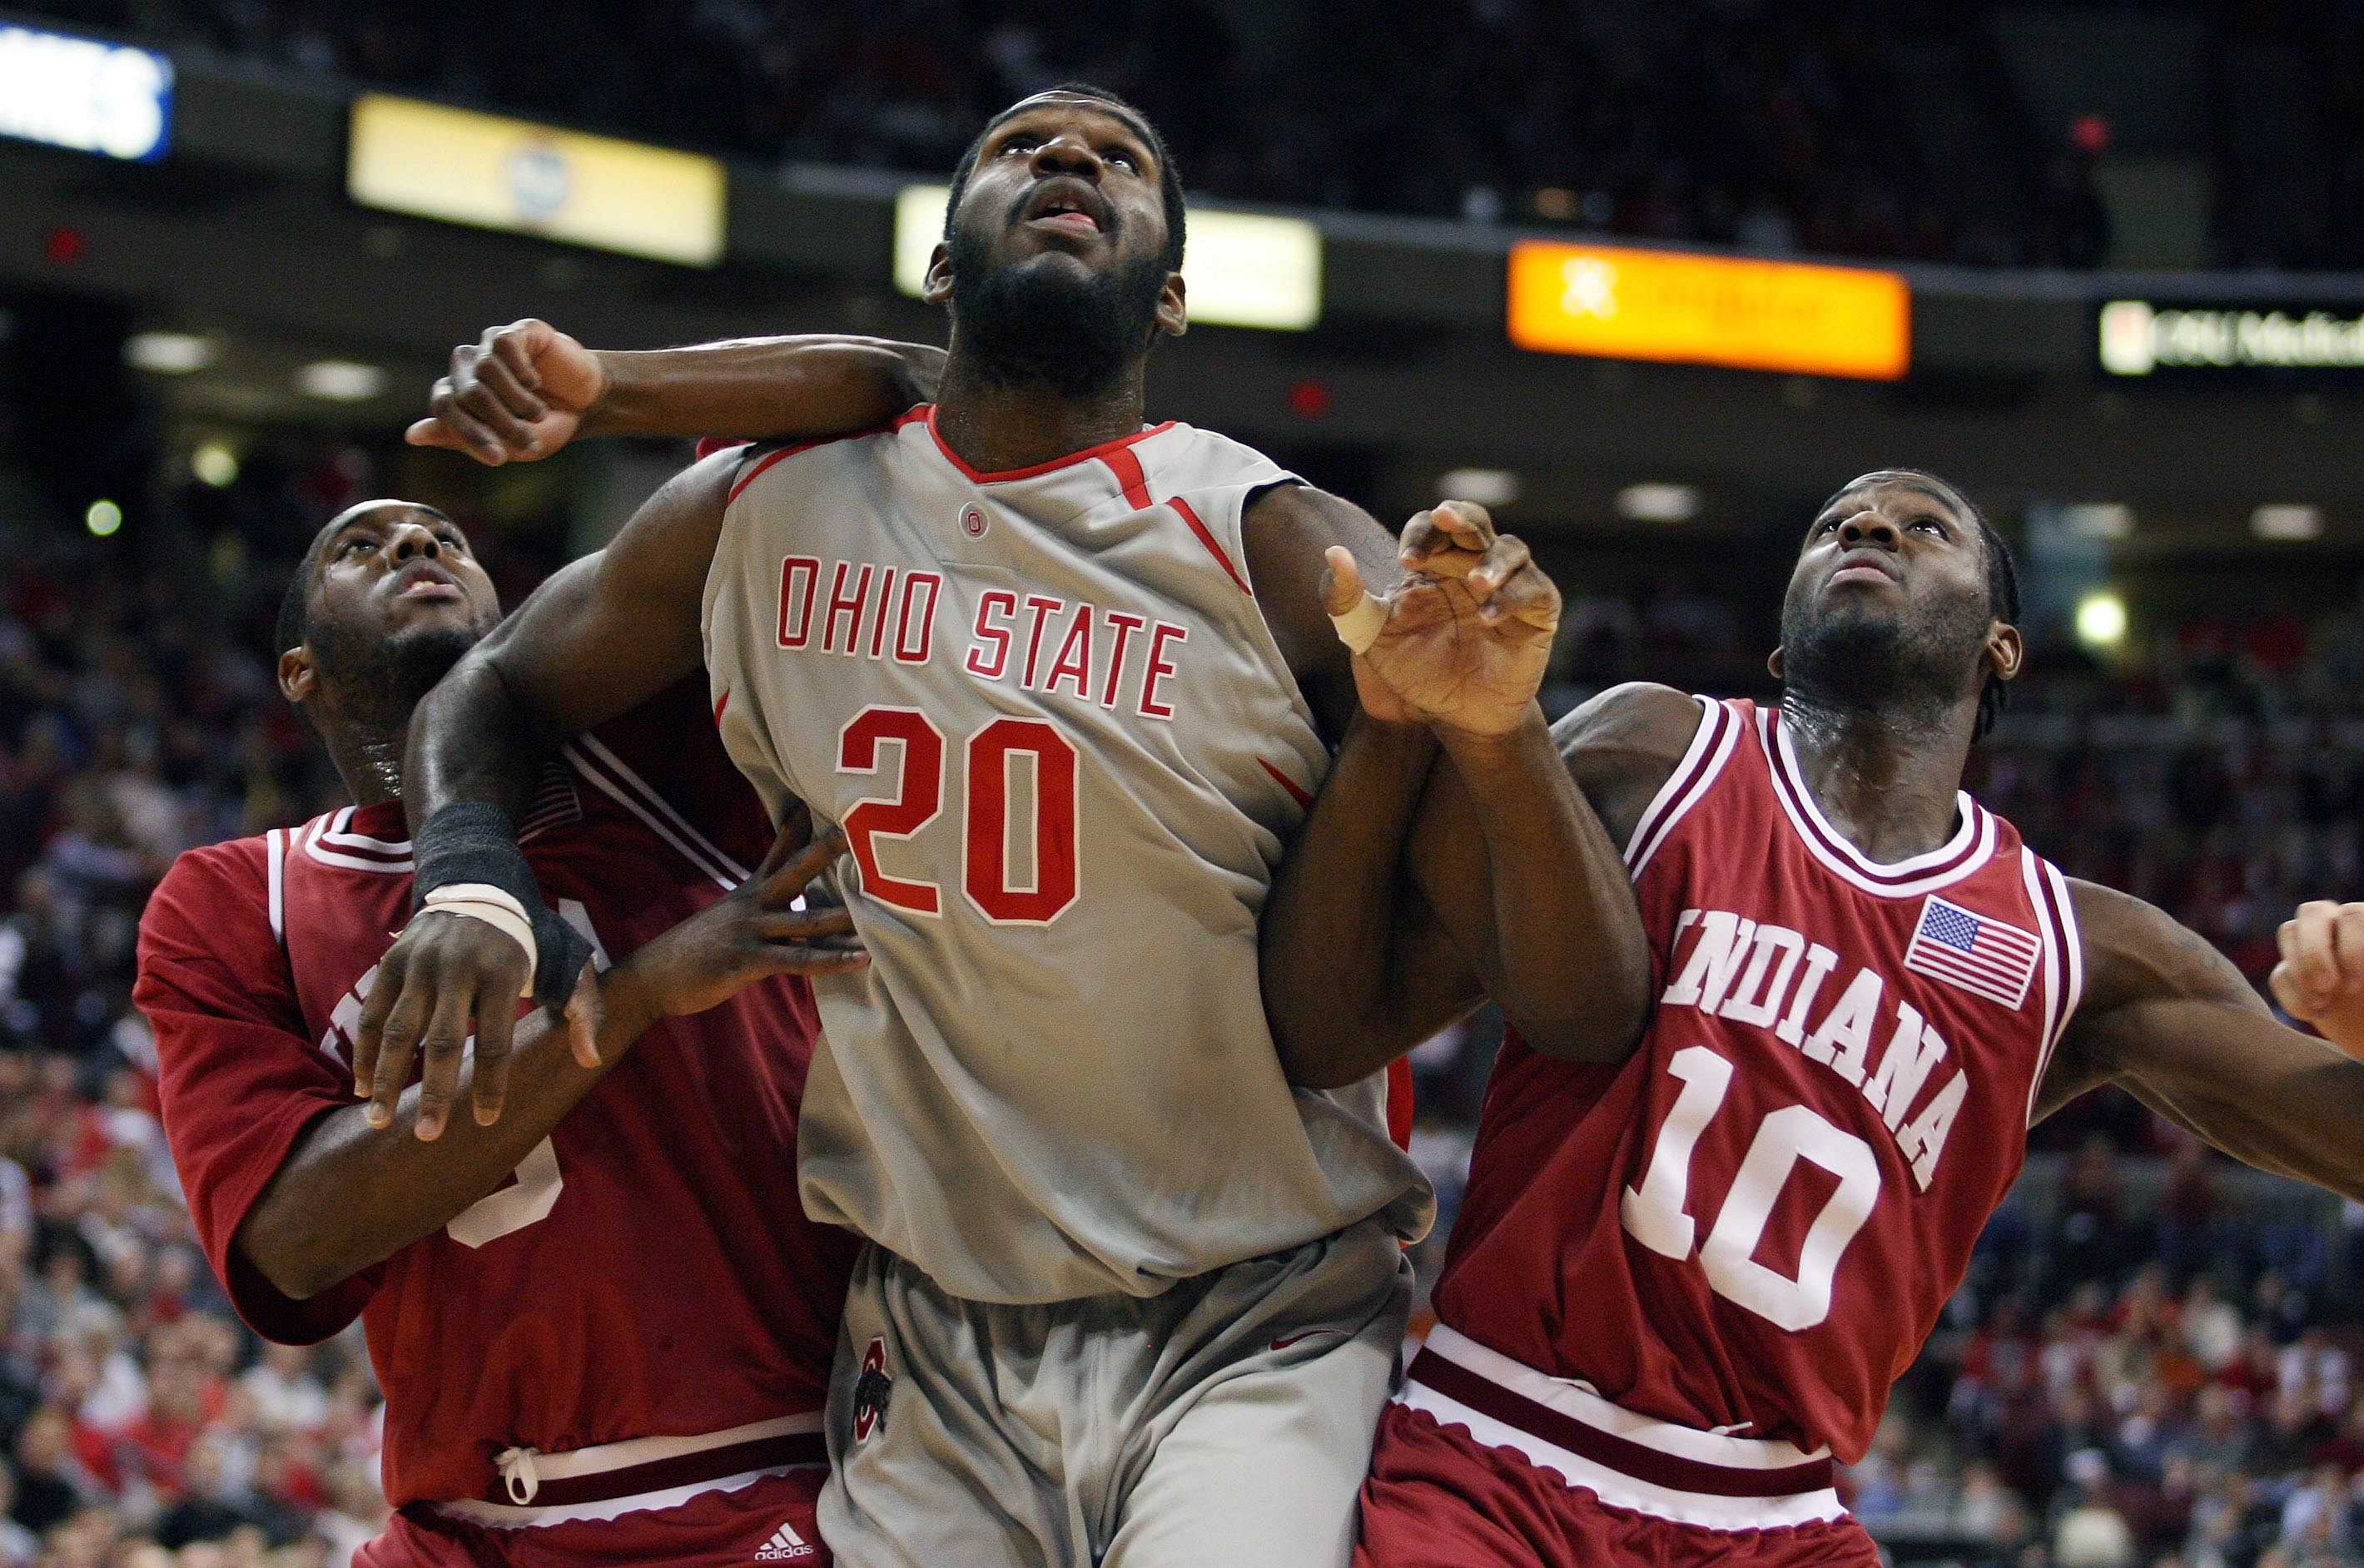 Roderick Wilmont (#10) averaged 7.5 ppg and 3.8 rpg during his time with Indiana.